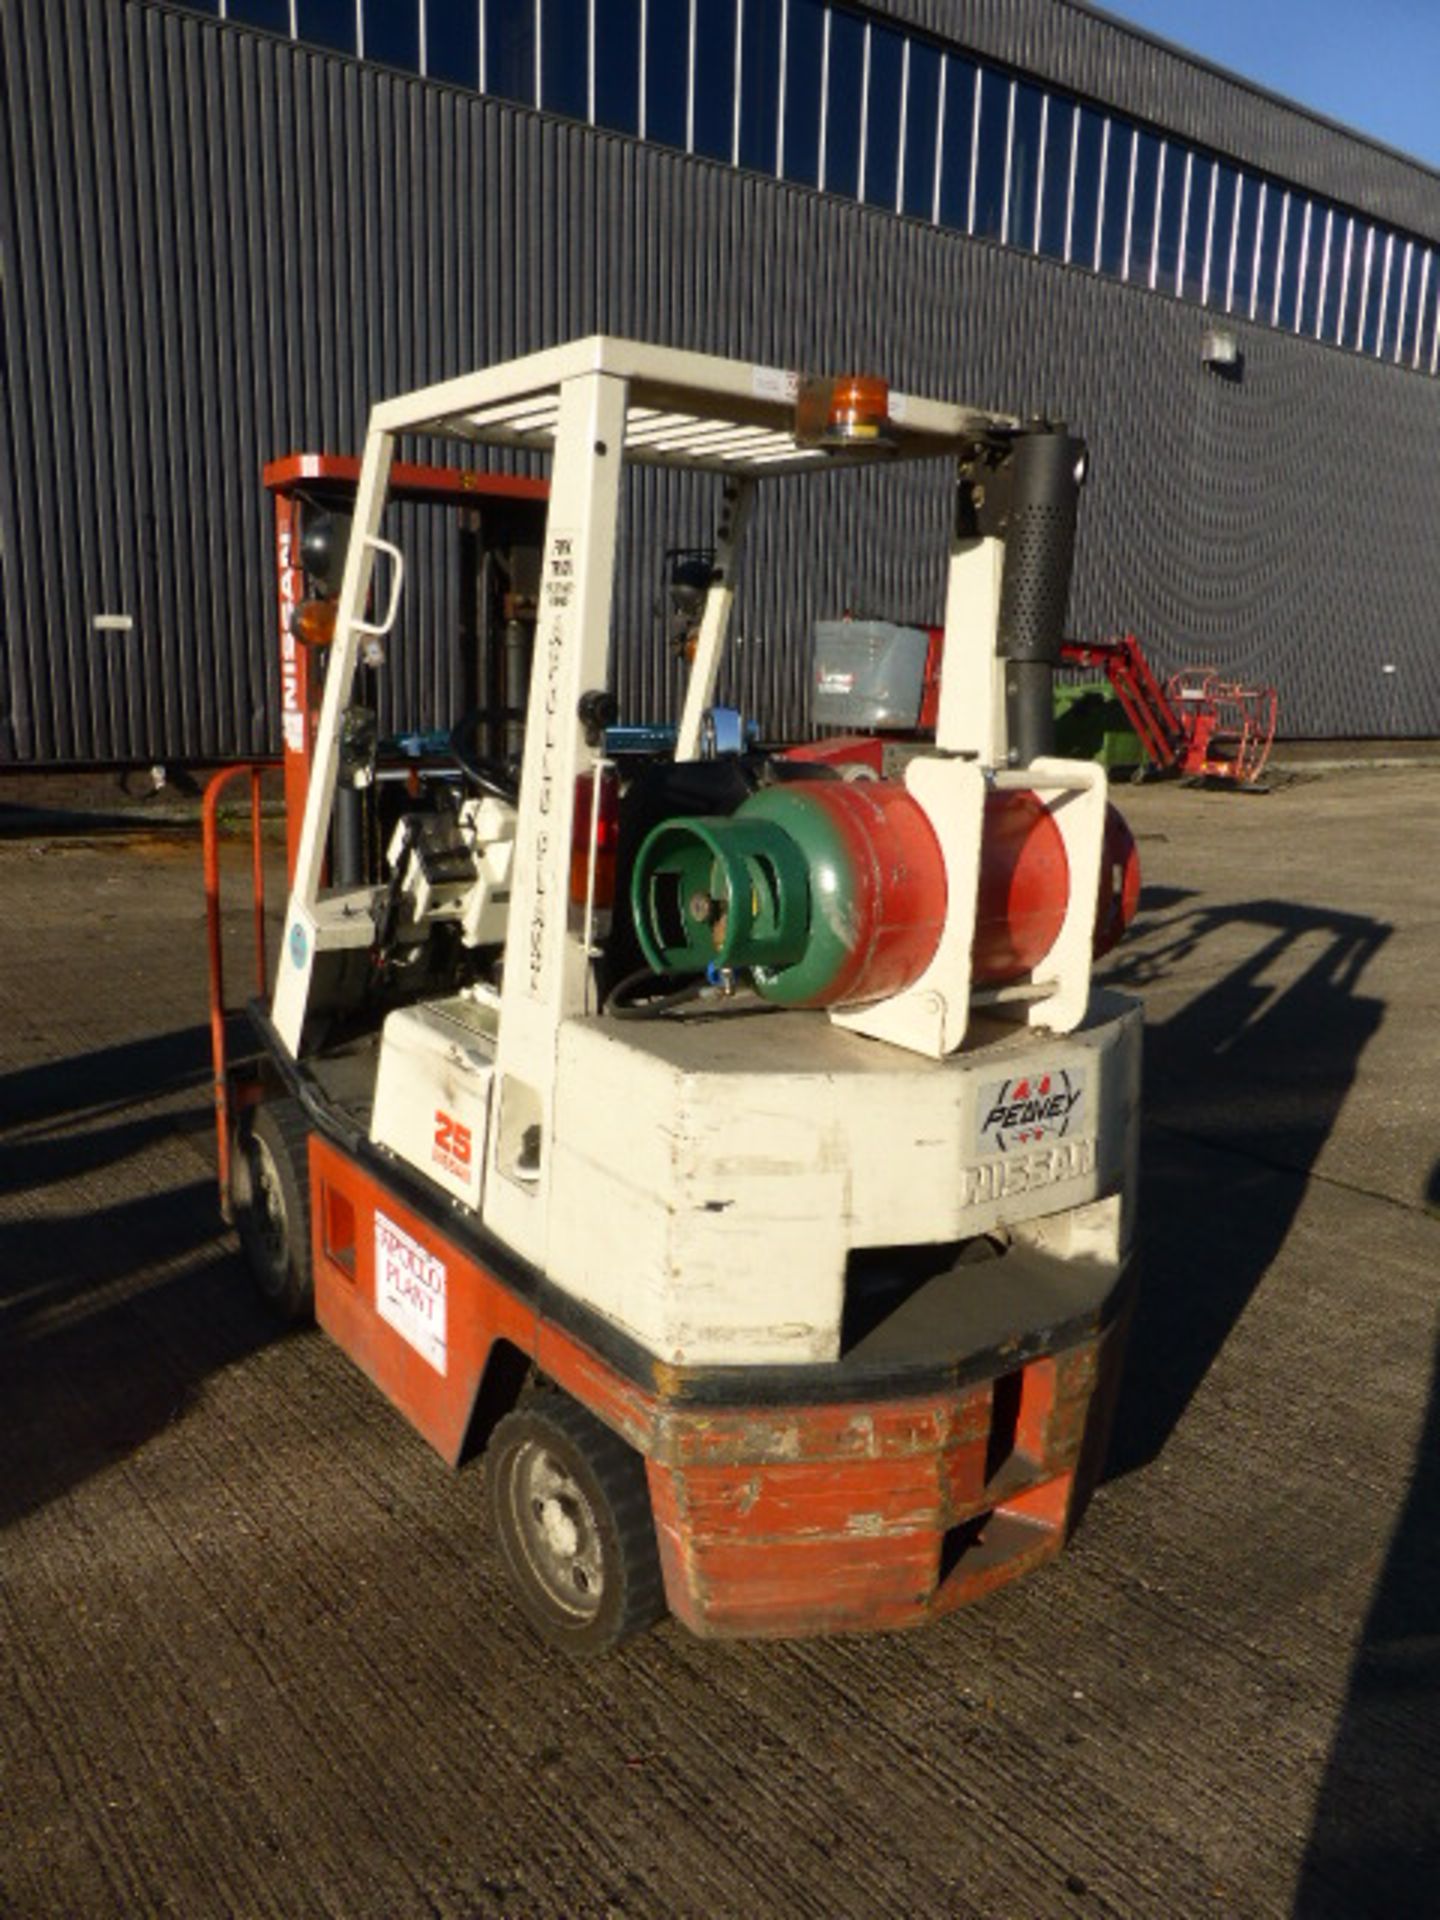 Nissan 25 calor gas counter balance fork lift truck with triple mast and side shift  Model: - Image 4 of 10